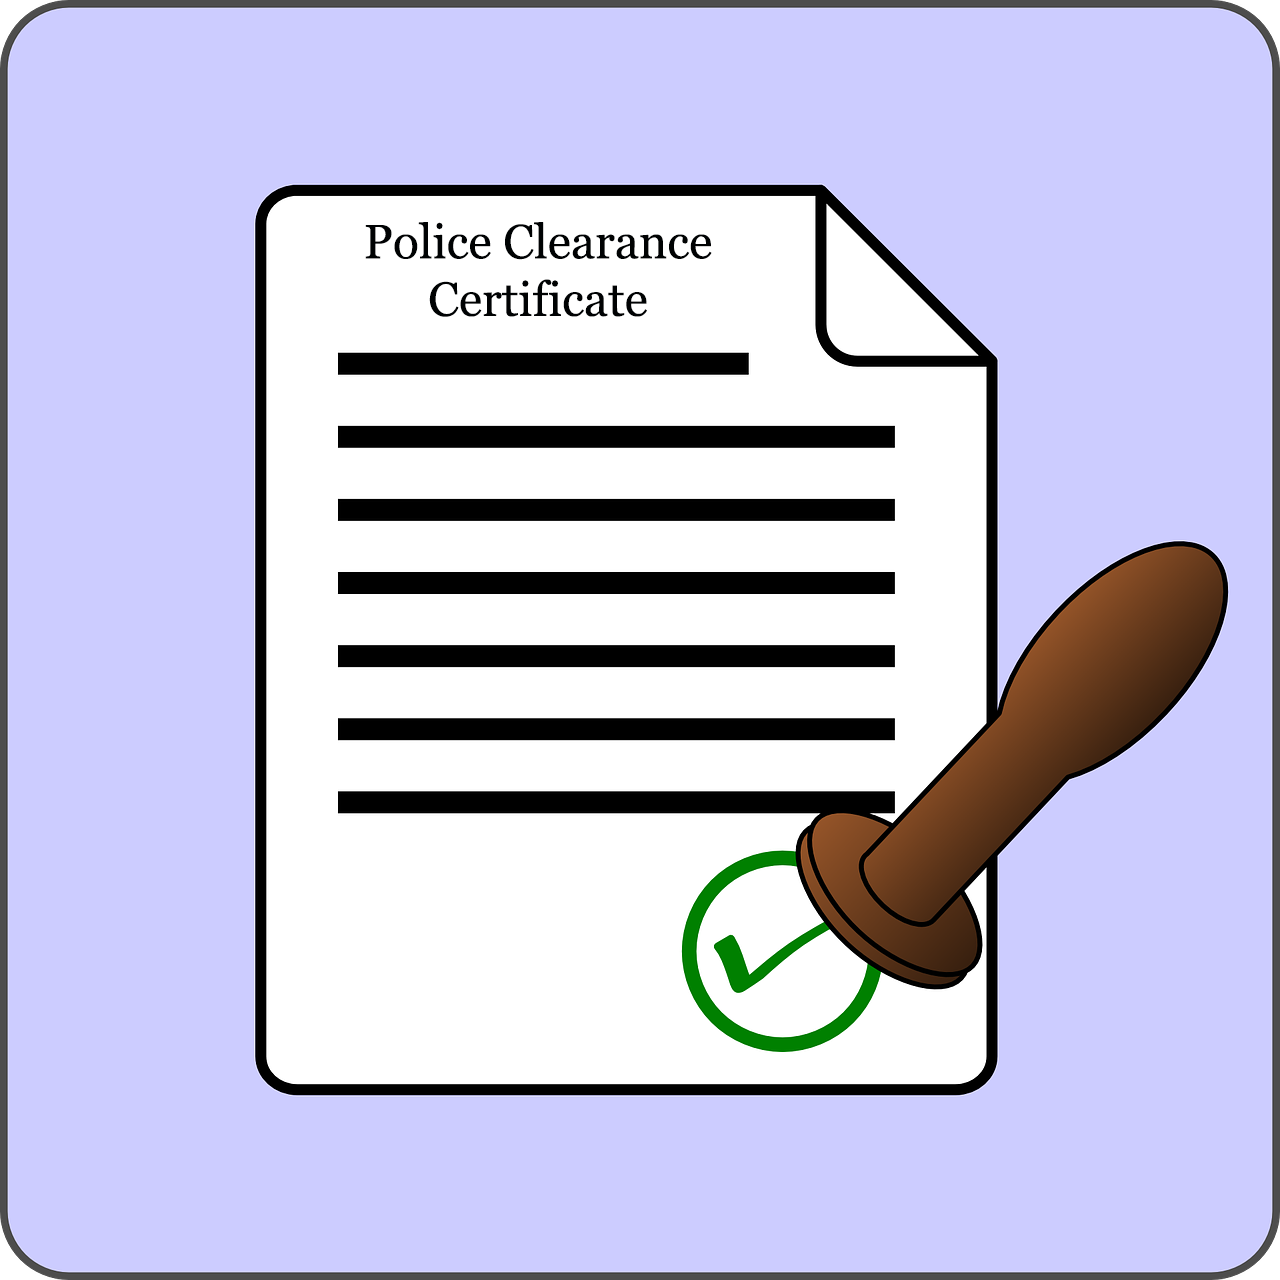 How to Get Police Clearance Certificate in India